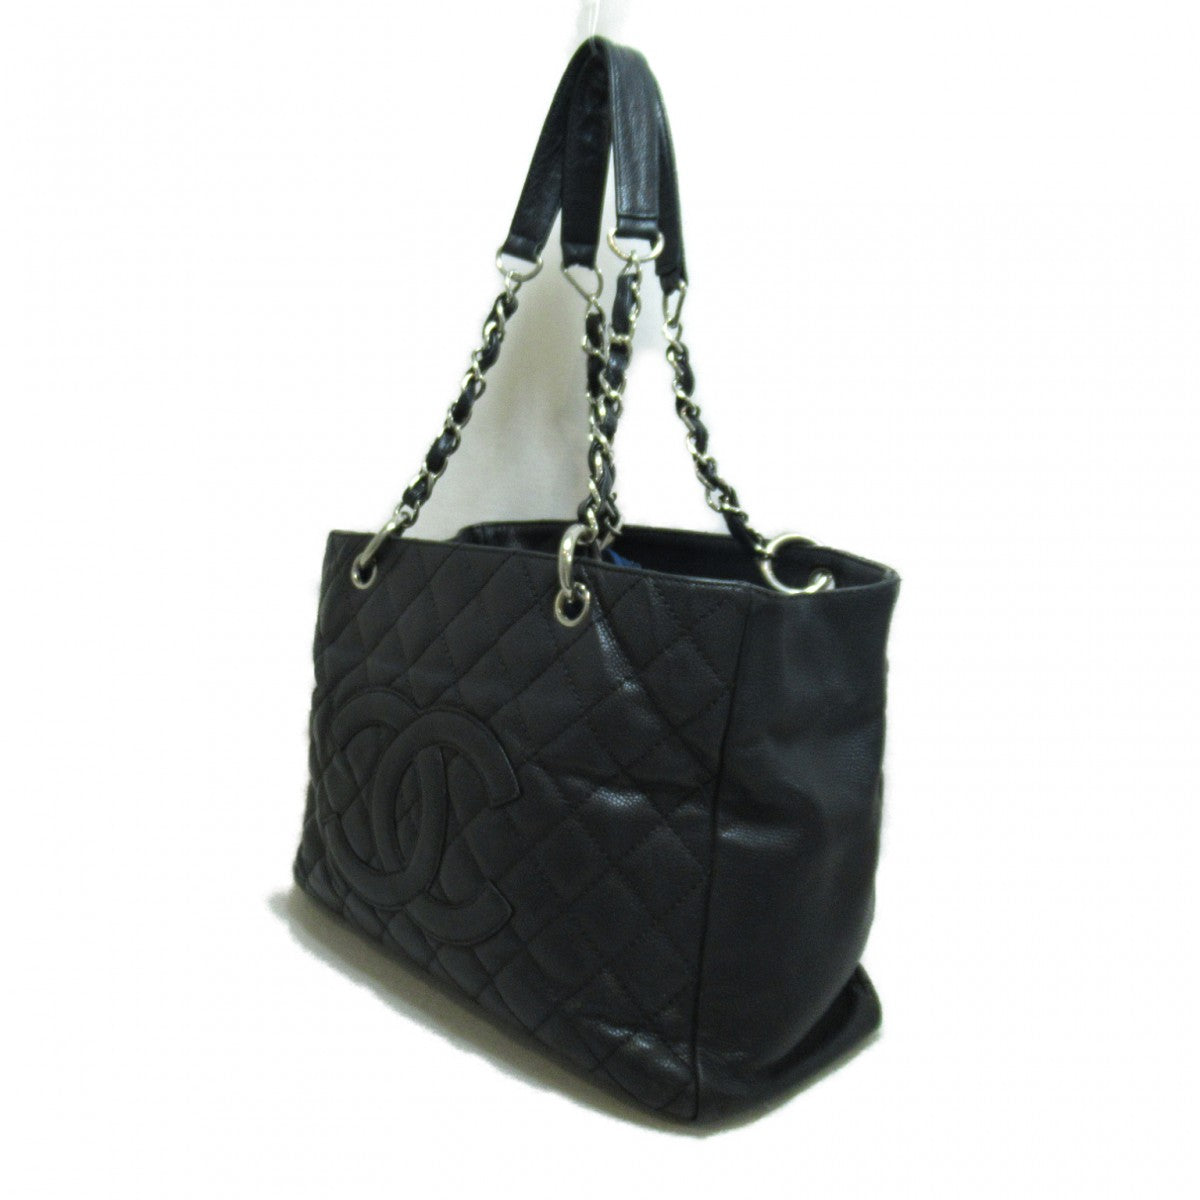 CC Quilted Caviar Chain Tote Bag A50995